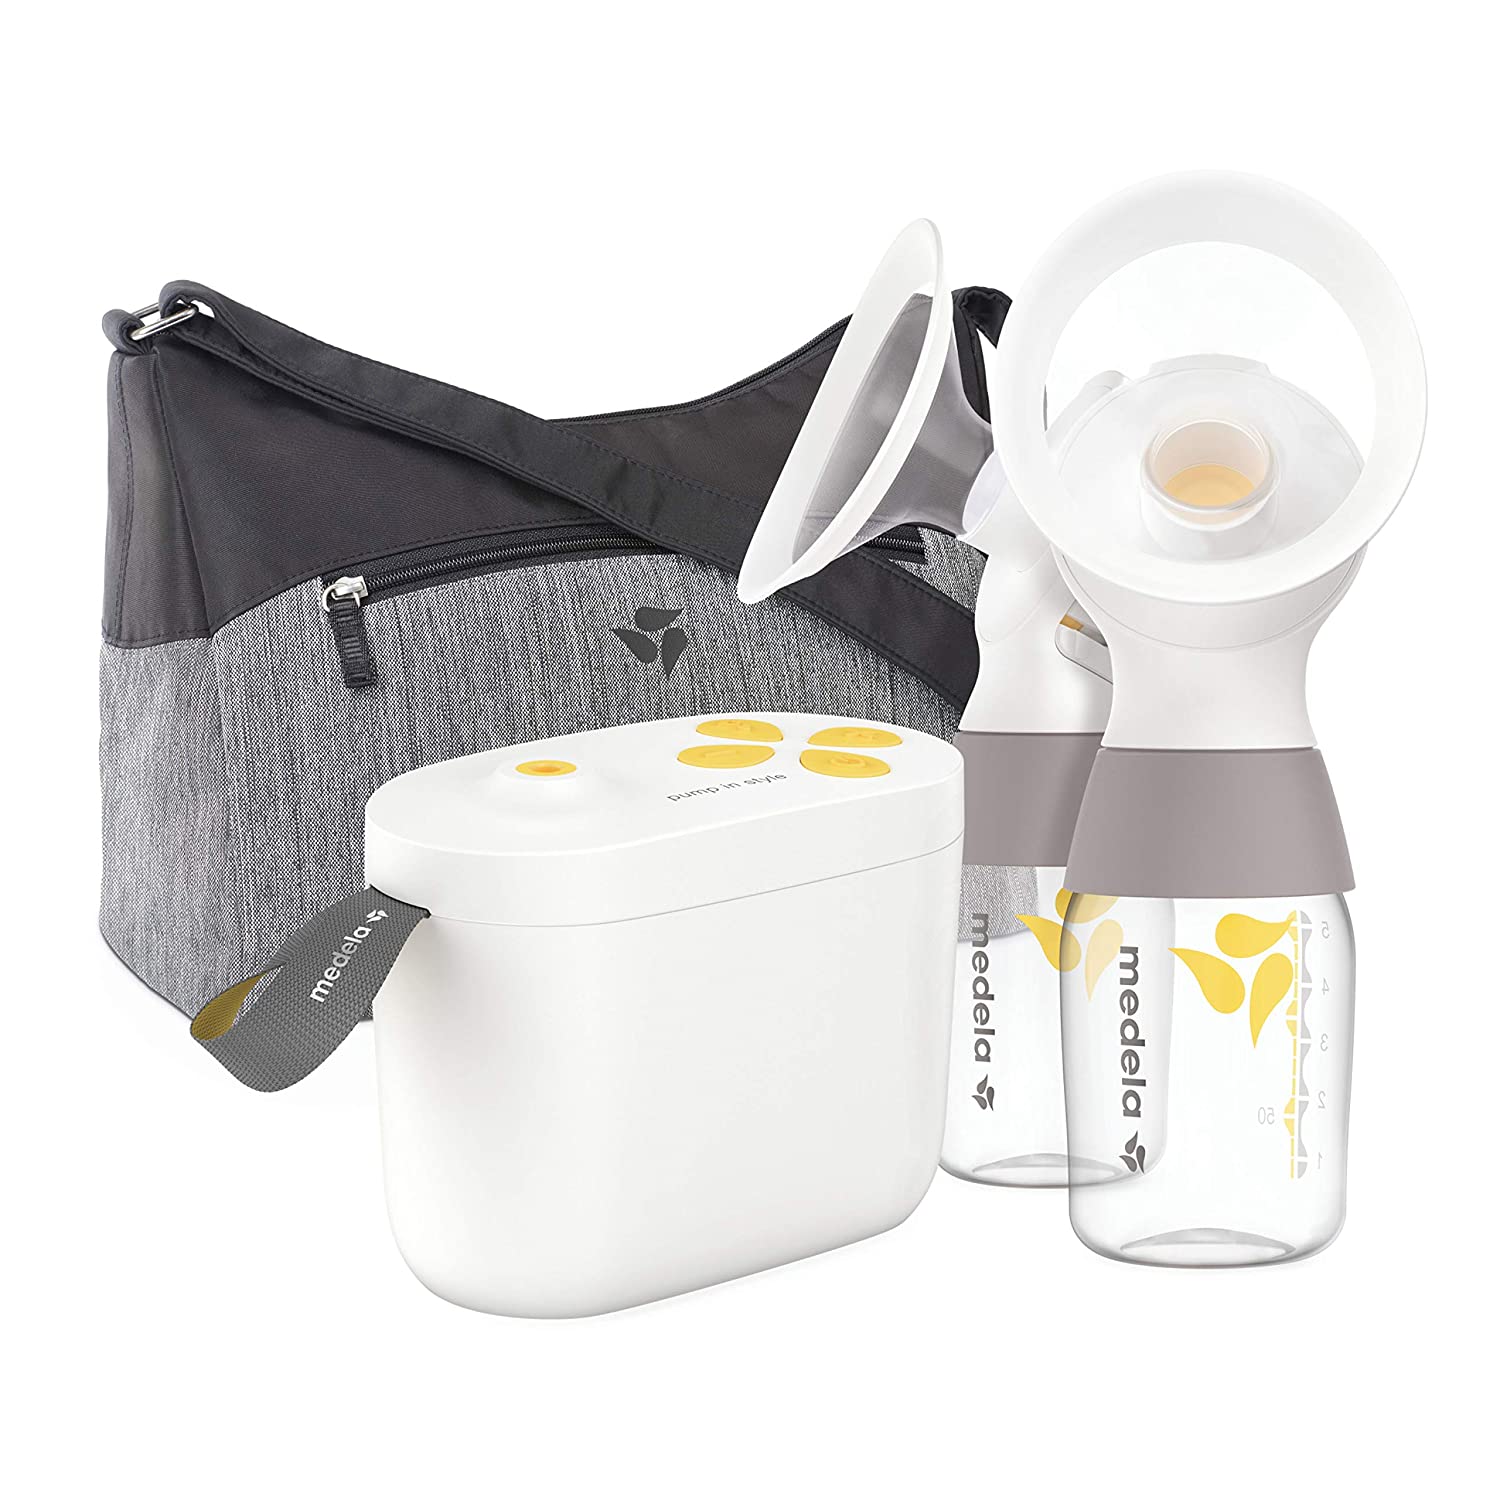 Medela New Pump in Style with MaxFlow, Electric Breast Pump, Closed System, Portable